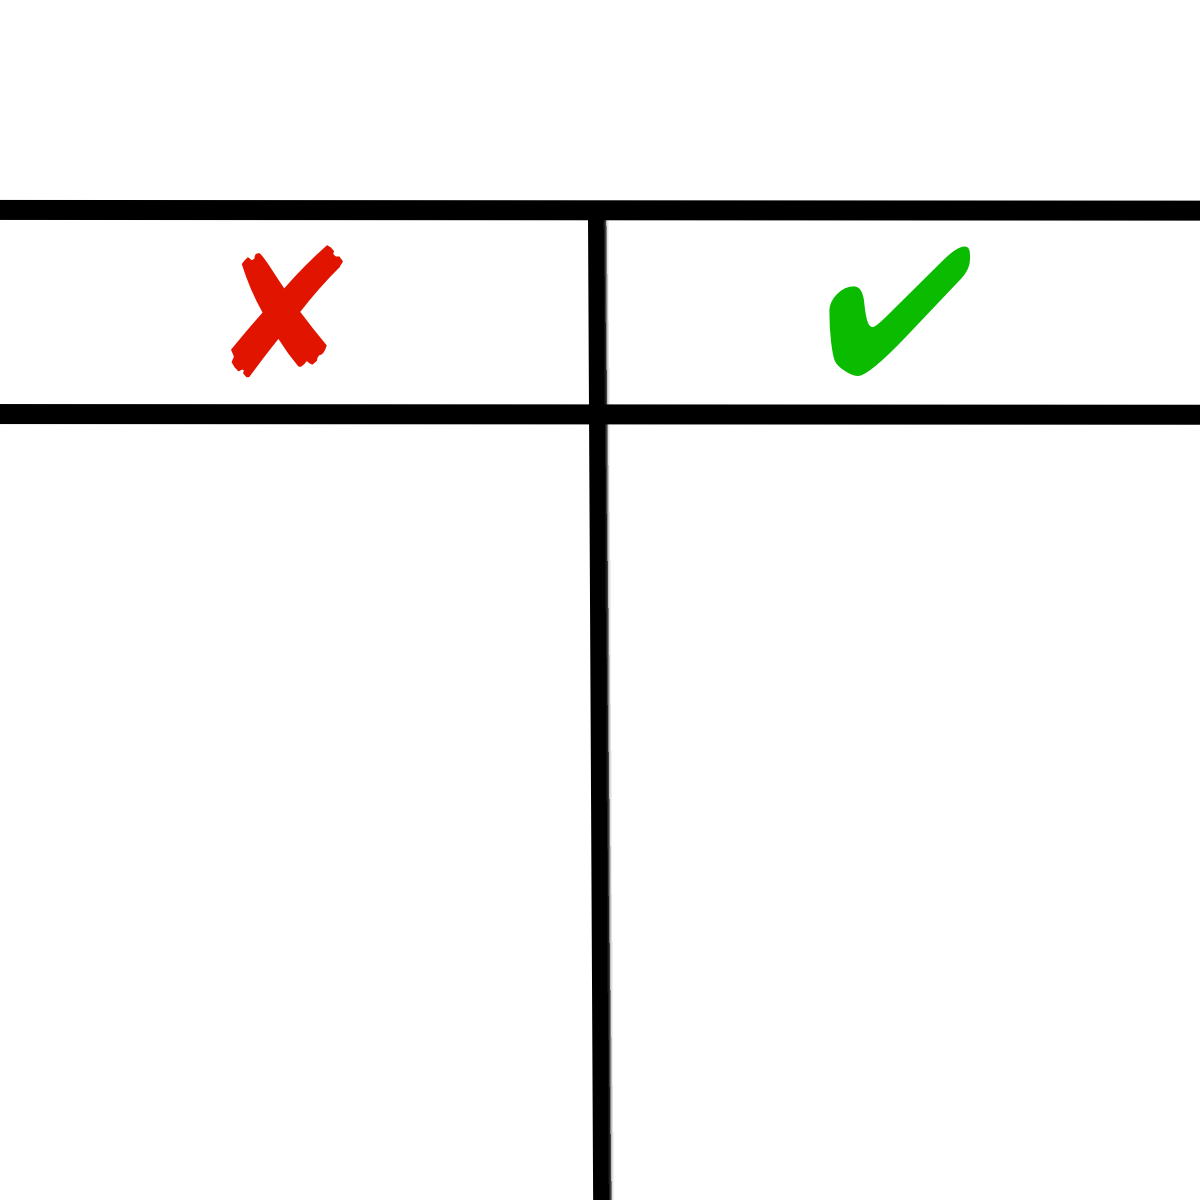 High Quality Yes or No - two things compared Blank Meme Template